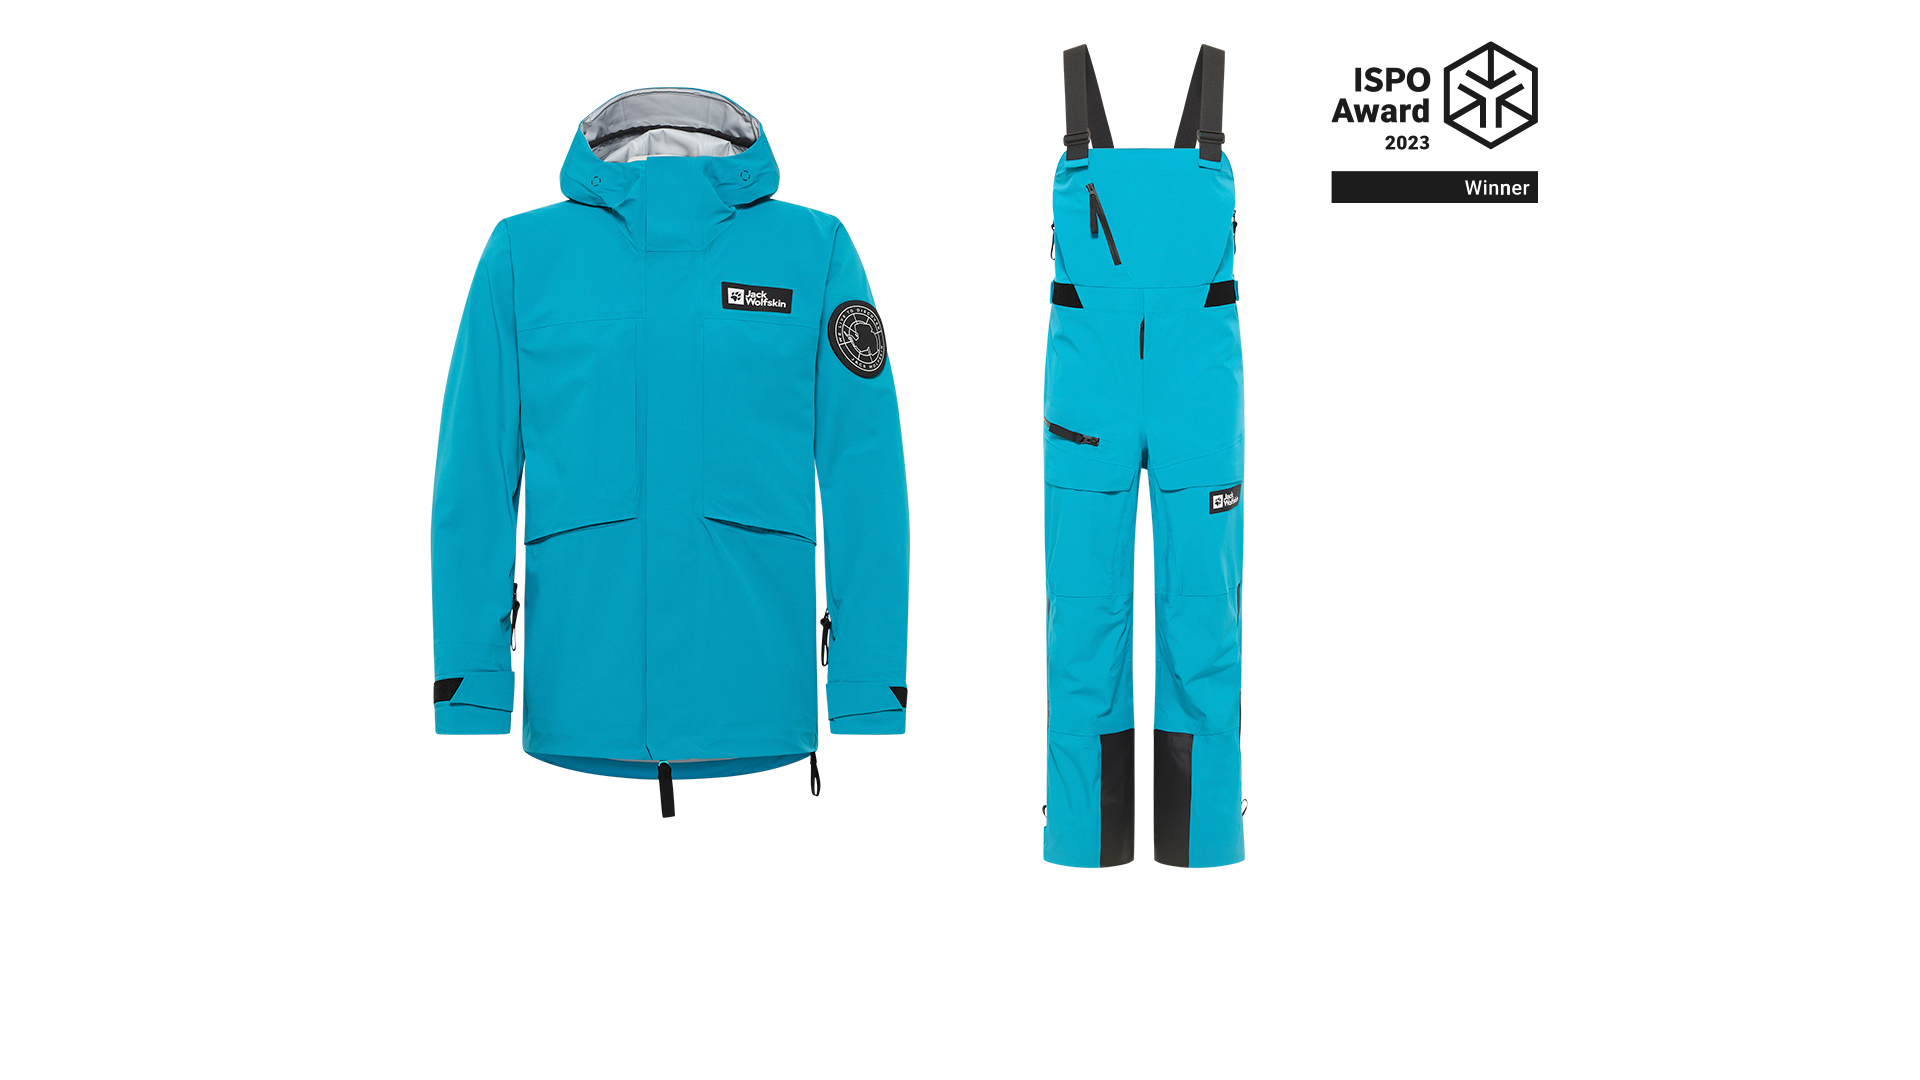 Review: The EXPDN 3L Jkt & Pant from Jack Wolfskin have won the ISPO Award  2023